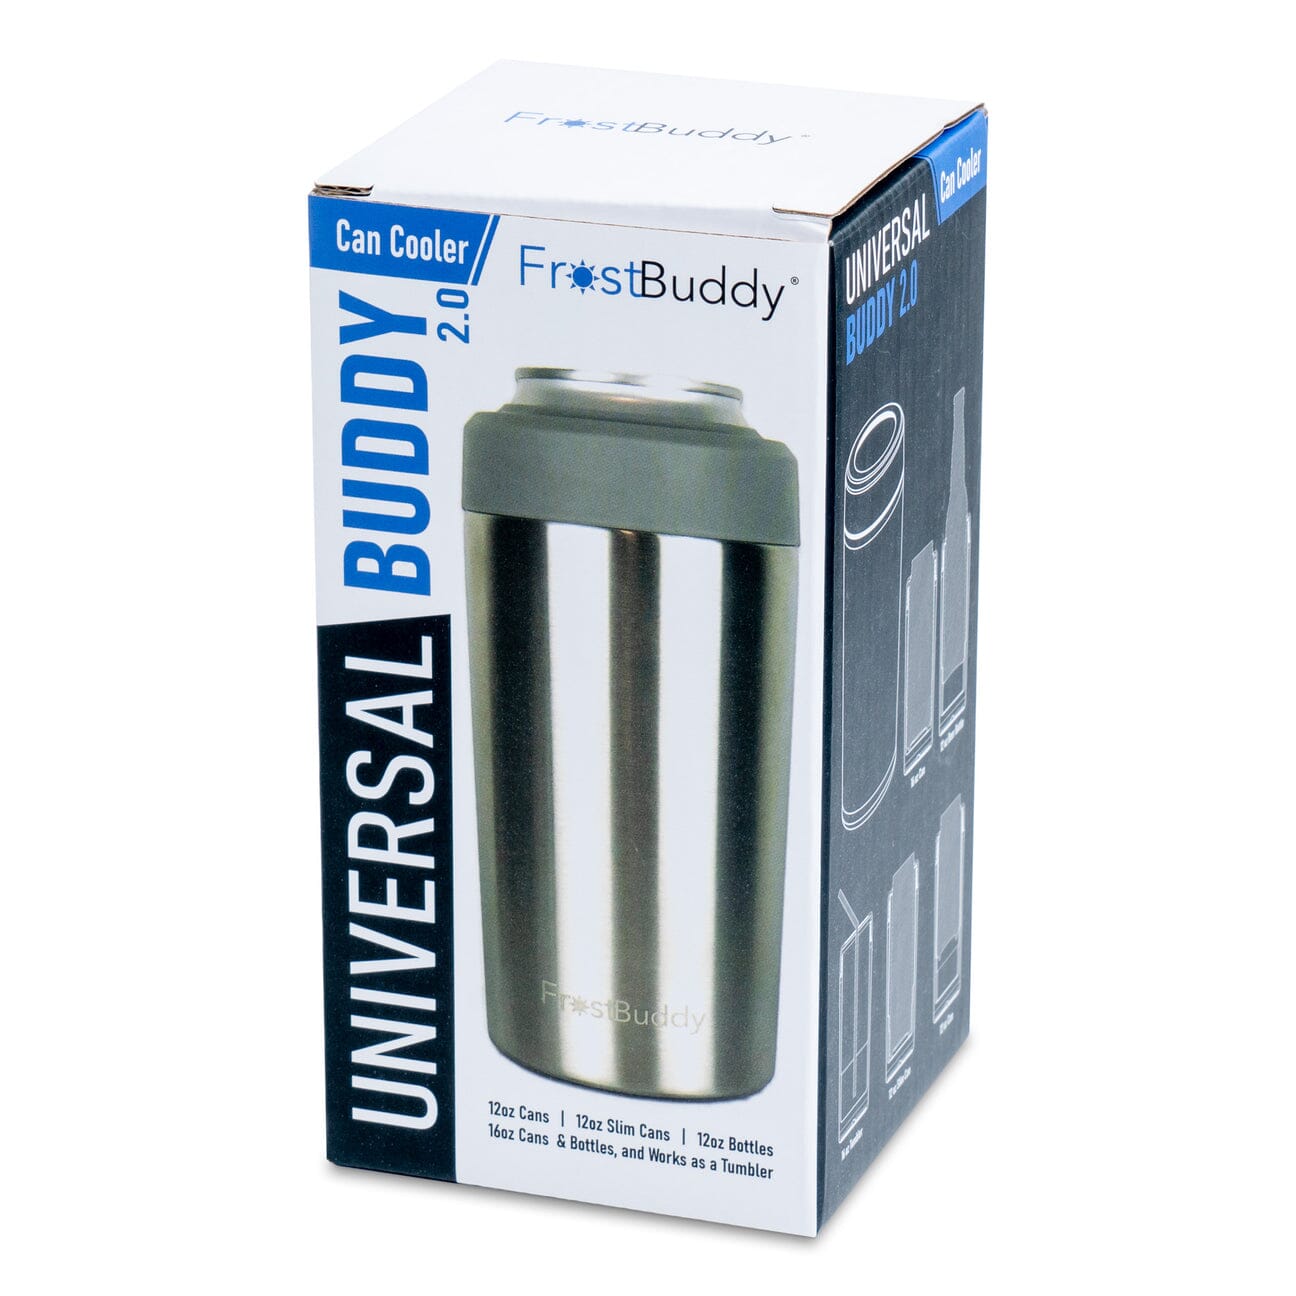 Frost buddy universal can cooler [customisable]